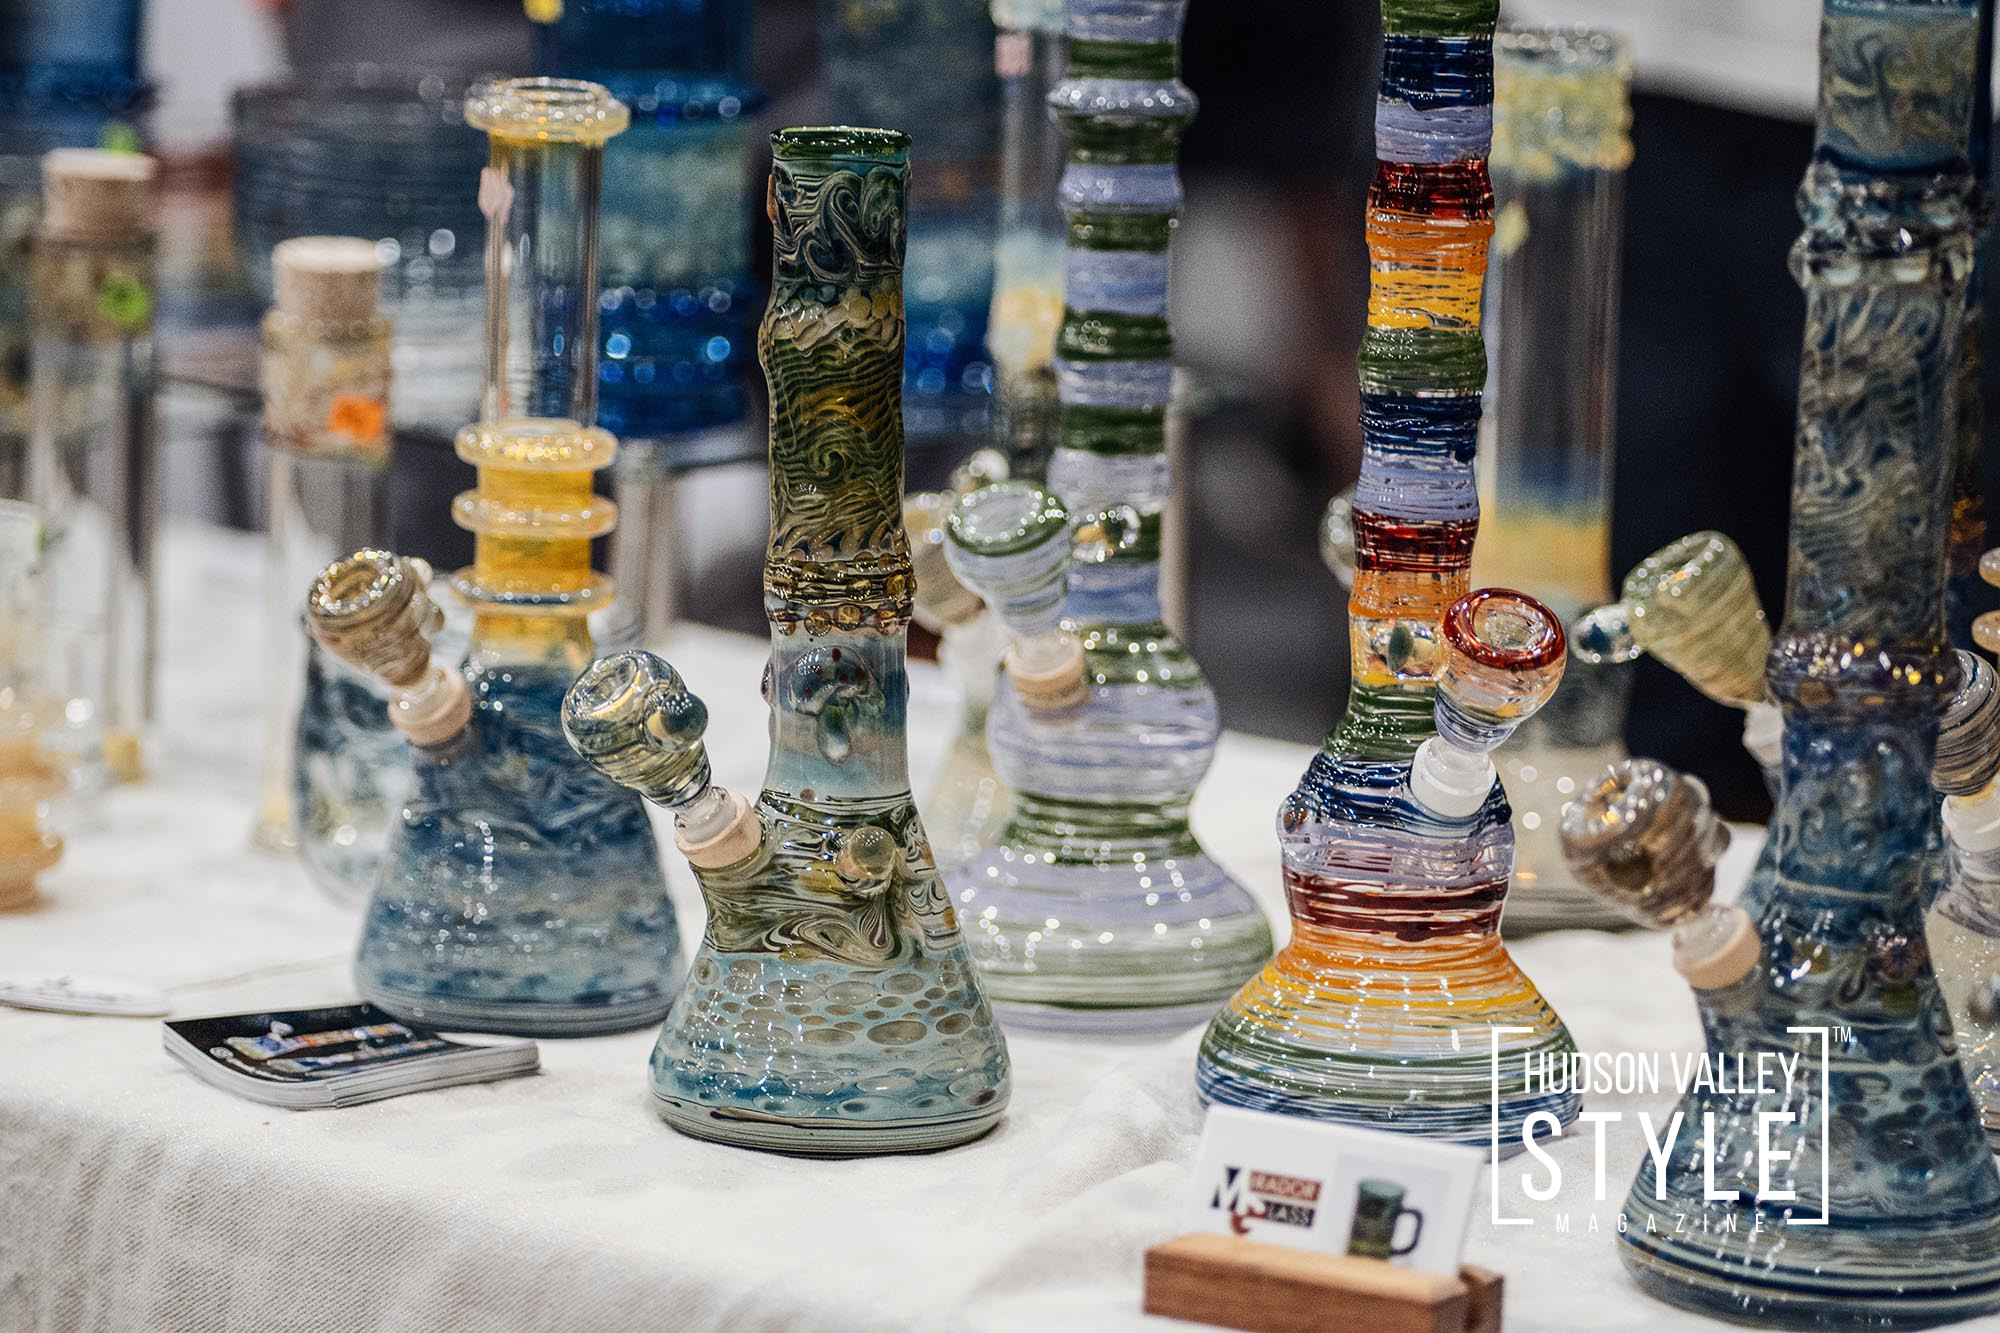 Cannastock 2023 Cannabis Festival, New York: A Vibrant Celebration of Cannabis and Community in the Hudson Valley – Photo Report by Photographer Maxwell Alexander, Duncan Avenue Studios